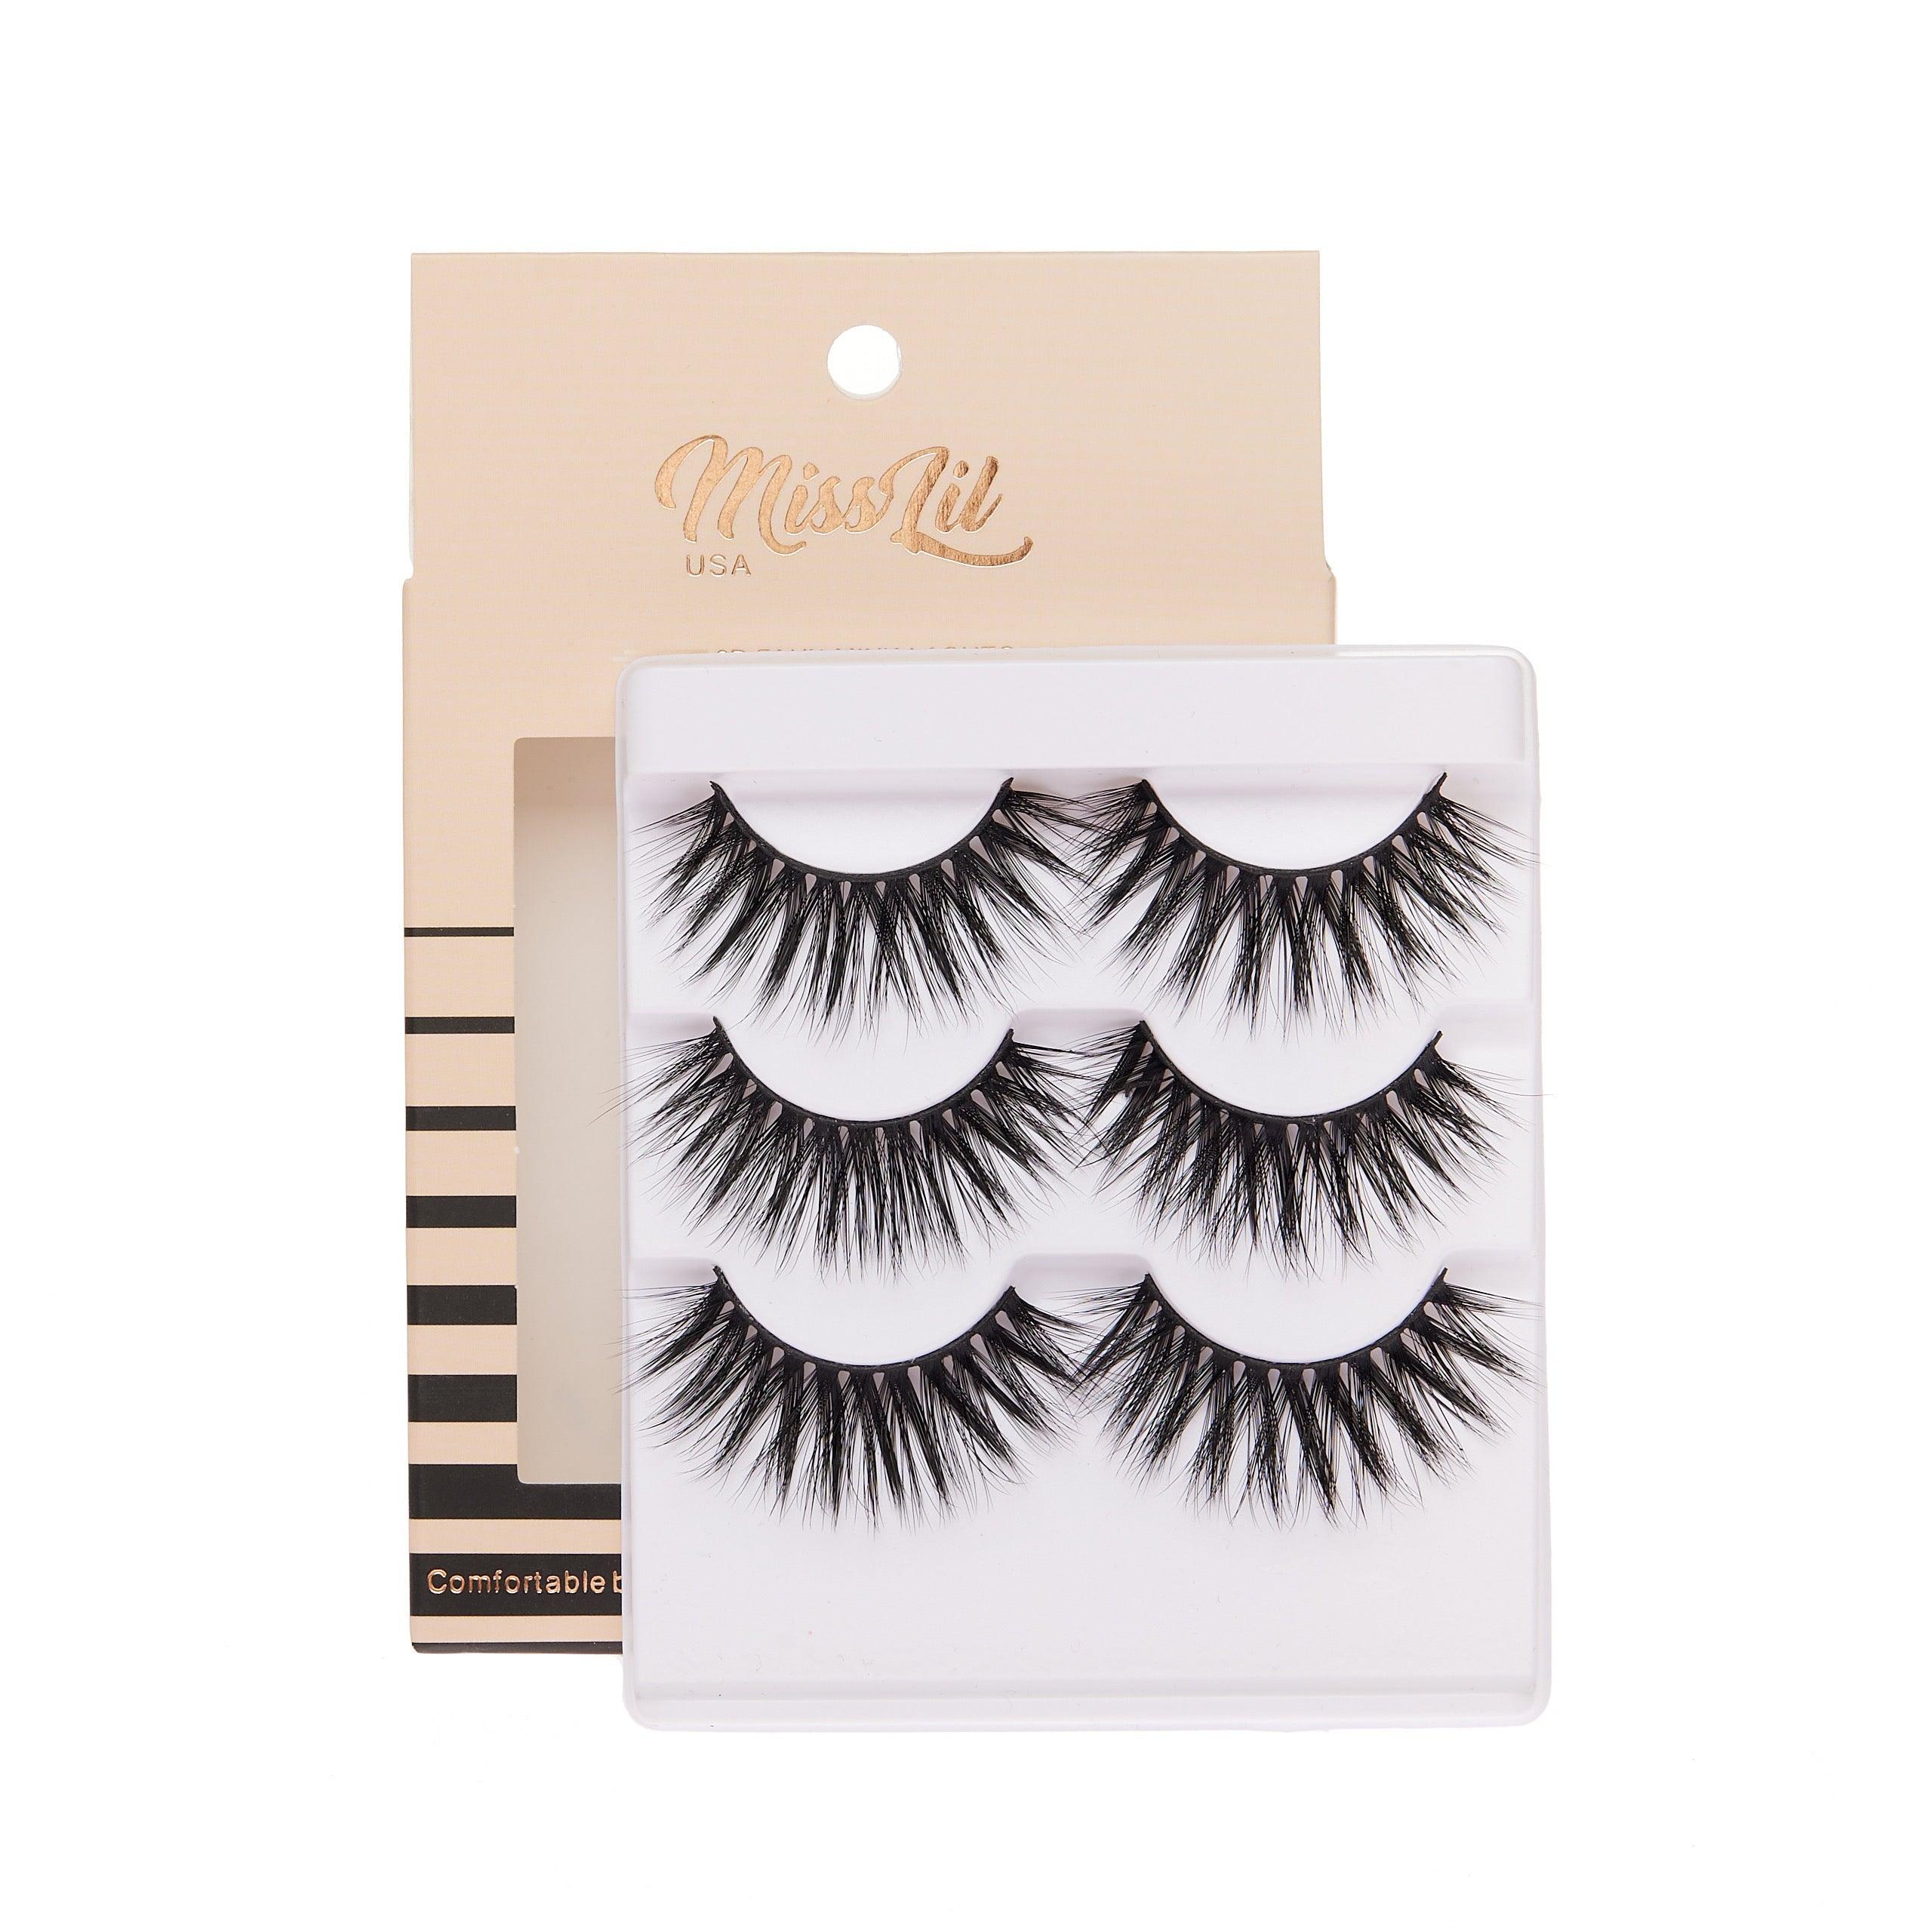 Copy of 3-Pair Faux 9D Mink Eyelashes - Luxury Collection #11 - Pack of 12 - Miss Lil USA